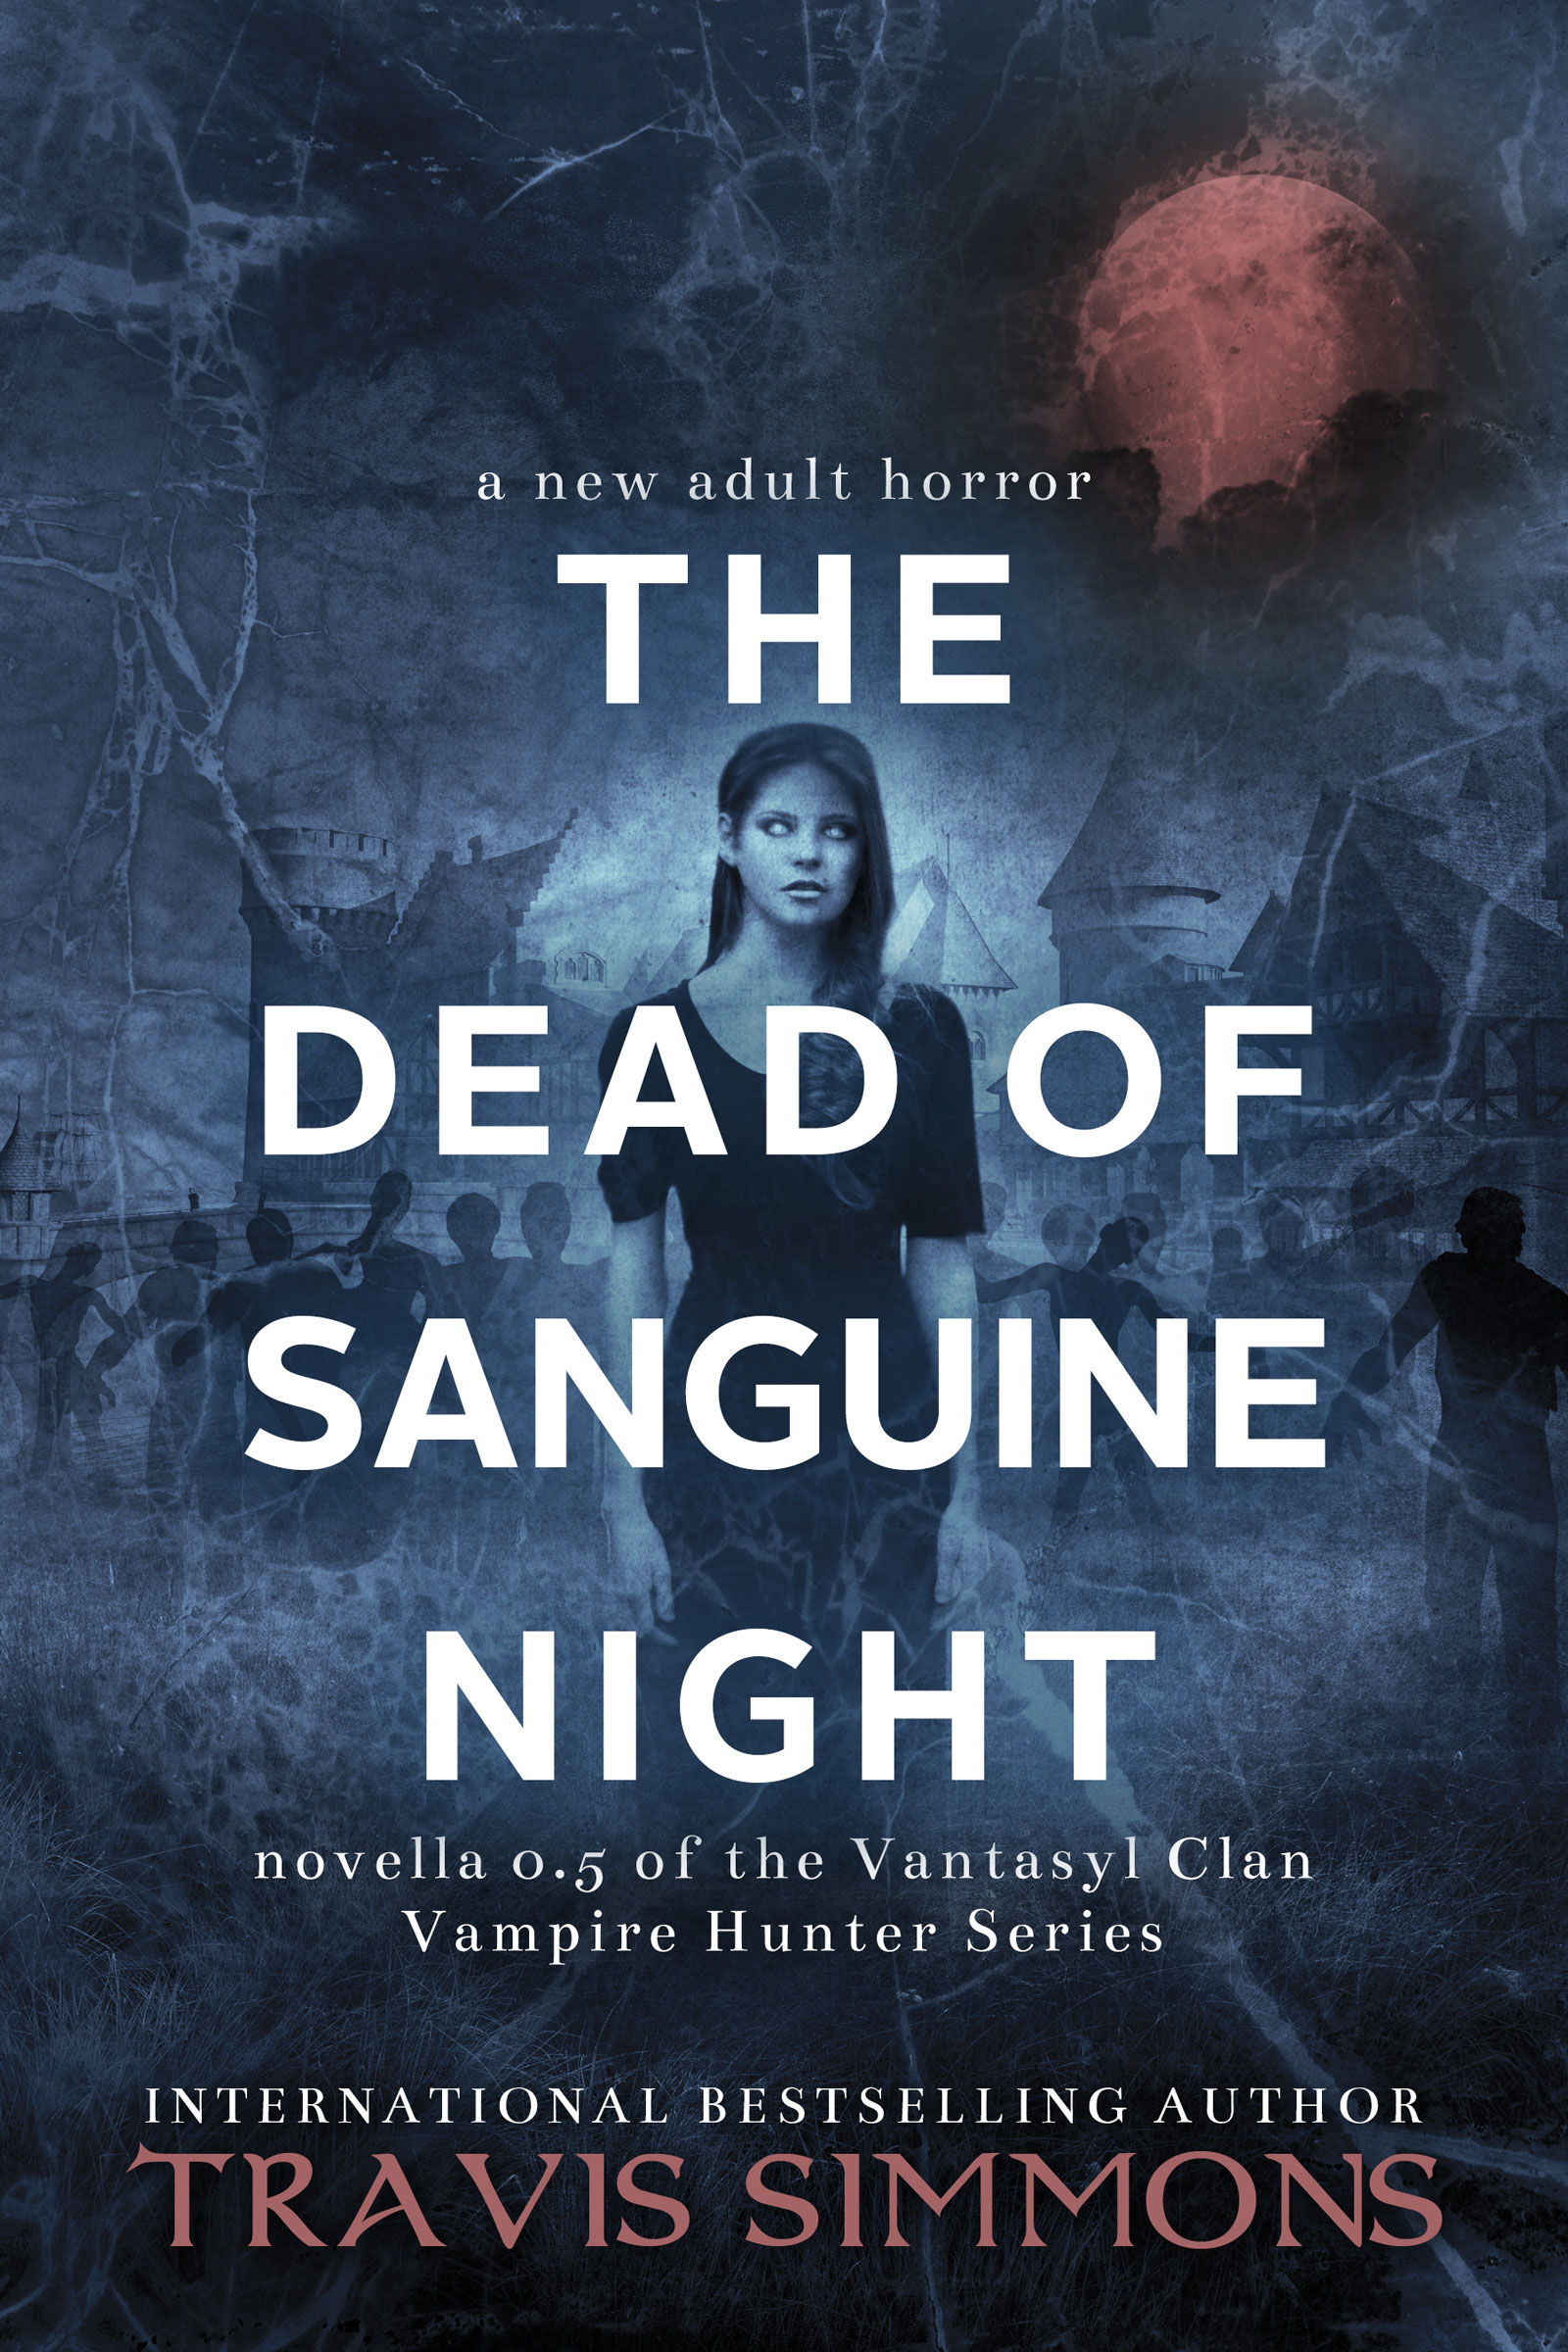 The Dead of Sanguine Night (2016) by Travis Simmons